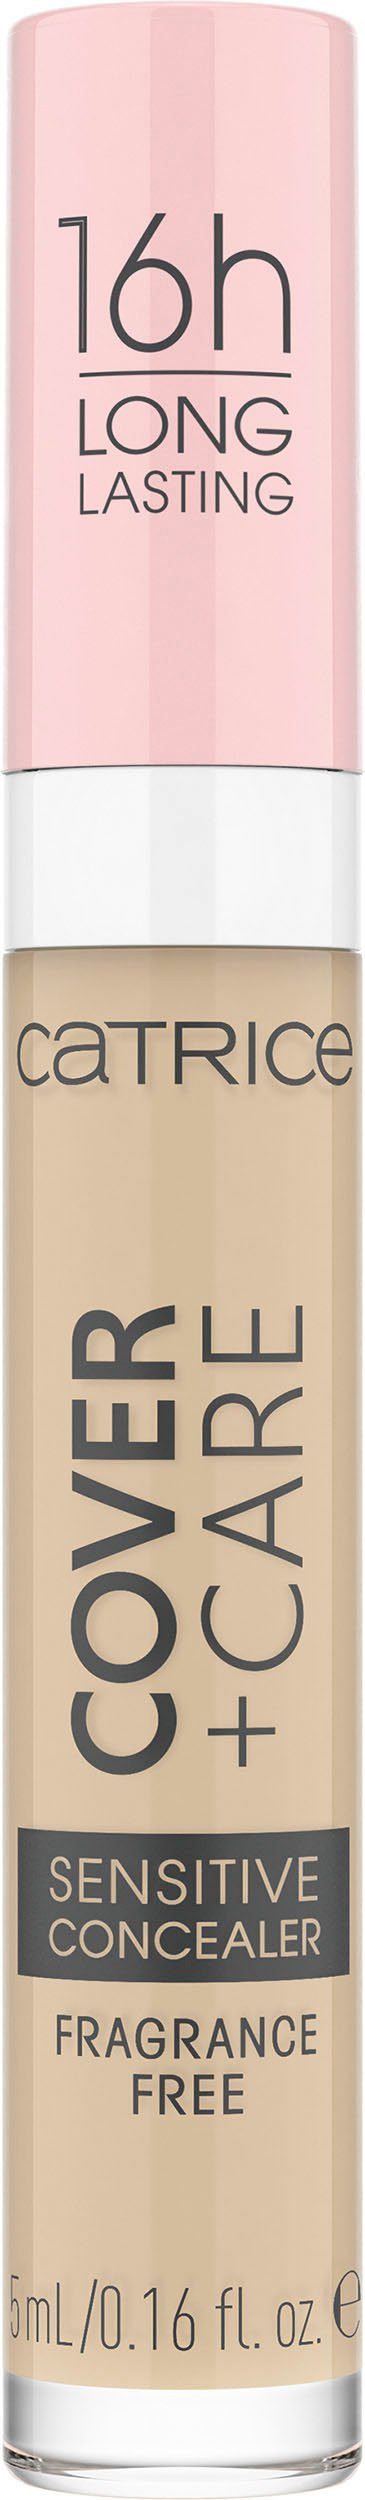 Catrice Concealer Catrice Concealer, Cover + 3-tlg. Care Sensitive nude 002N